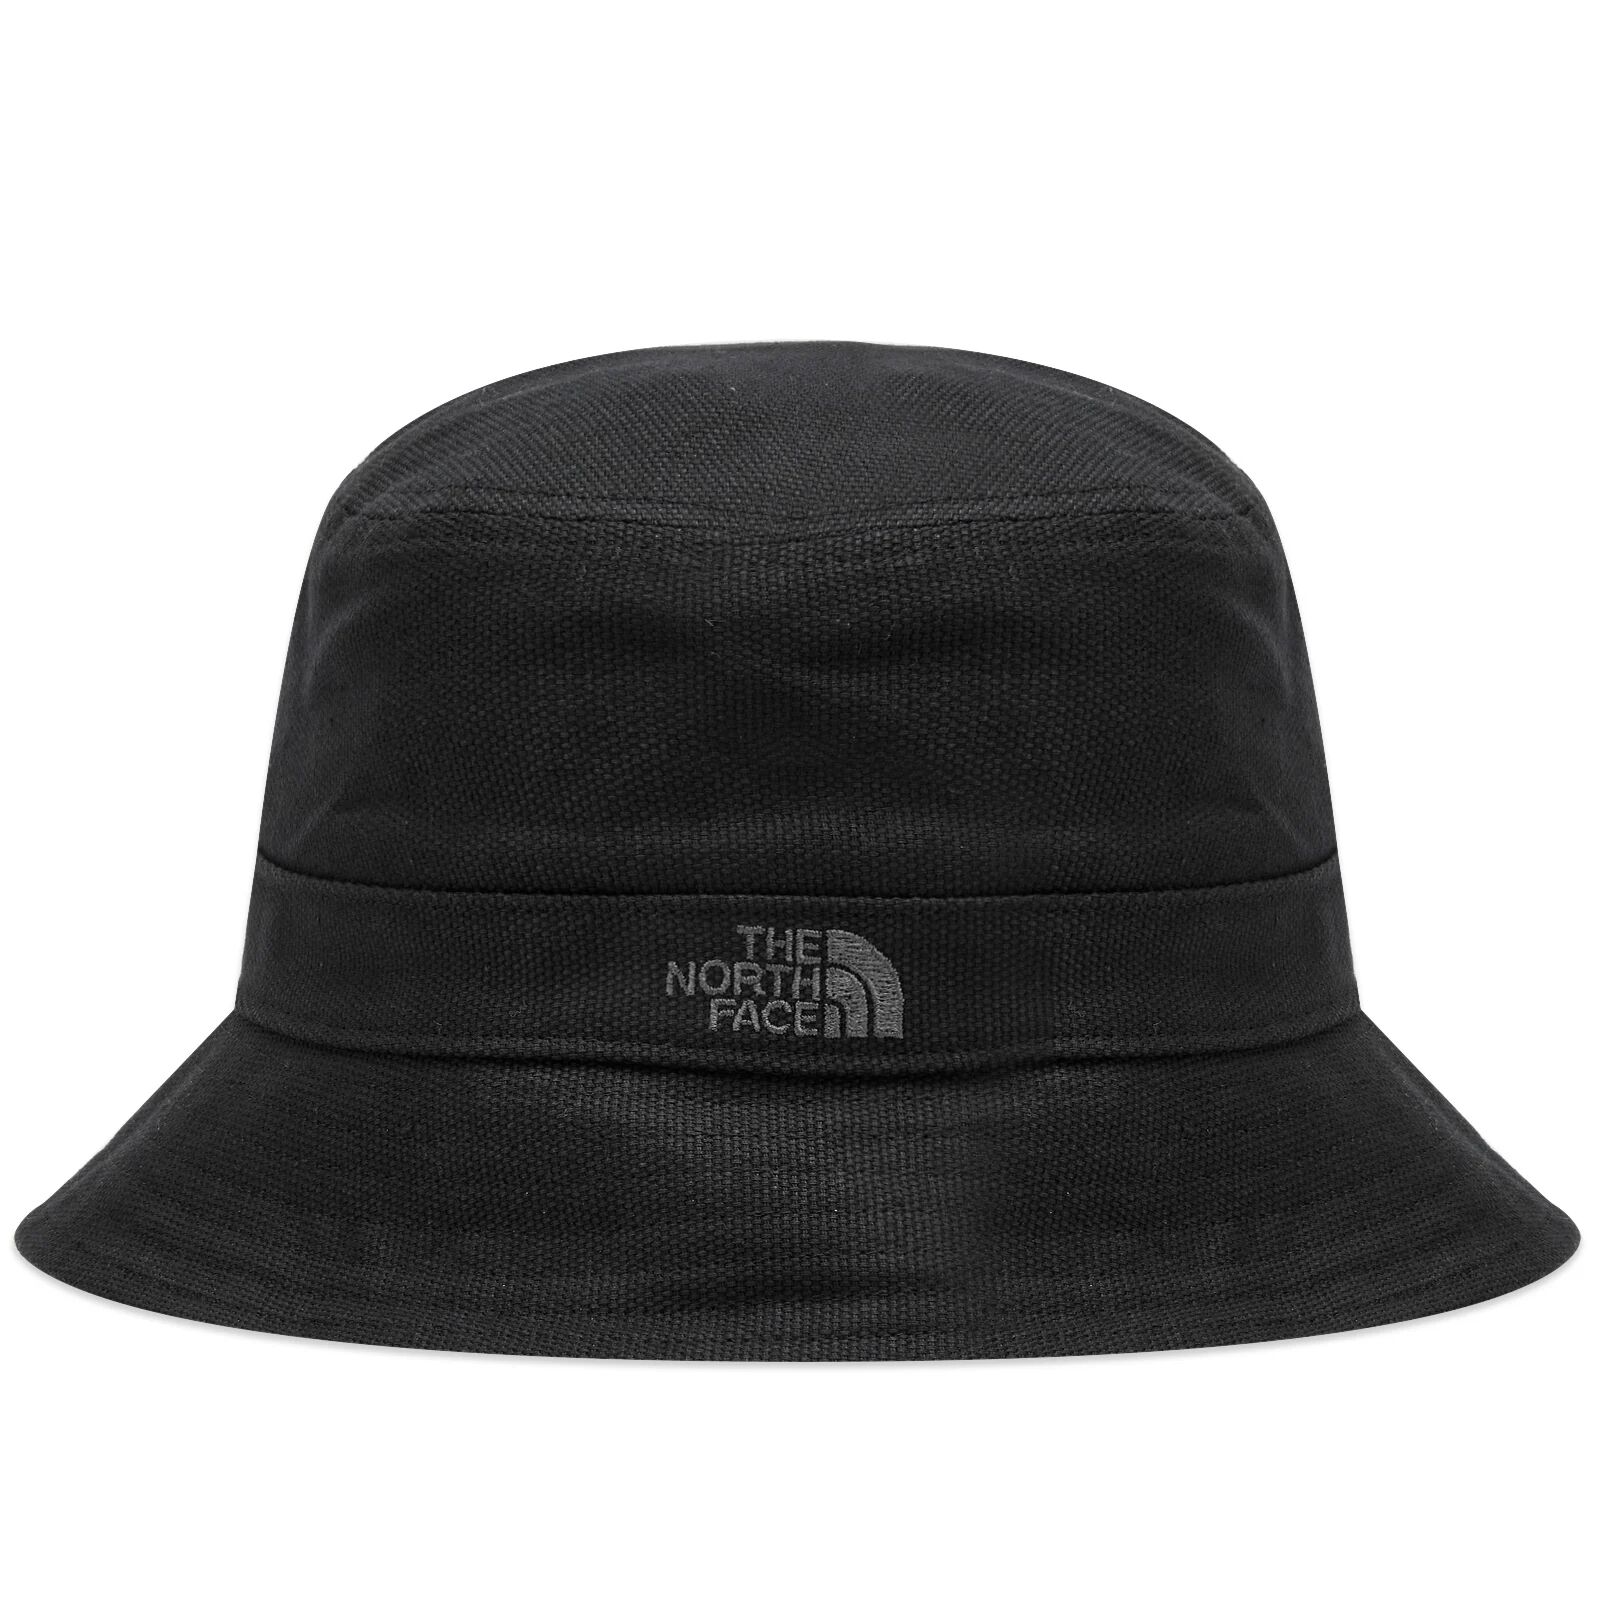 The North Face Women's Mountain Bucket Hat in Tnf Black, Size Small